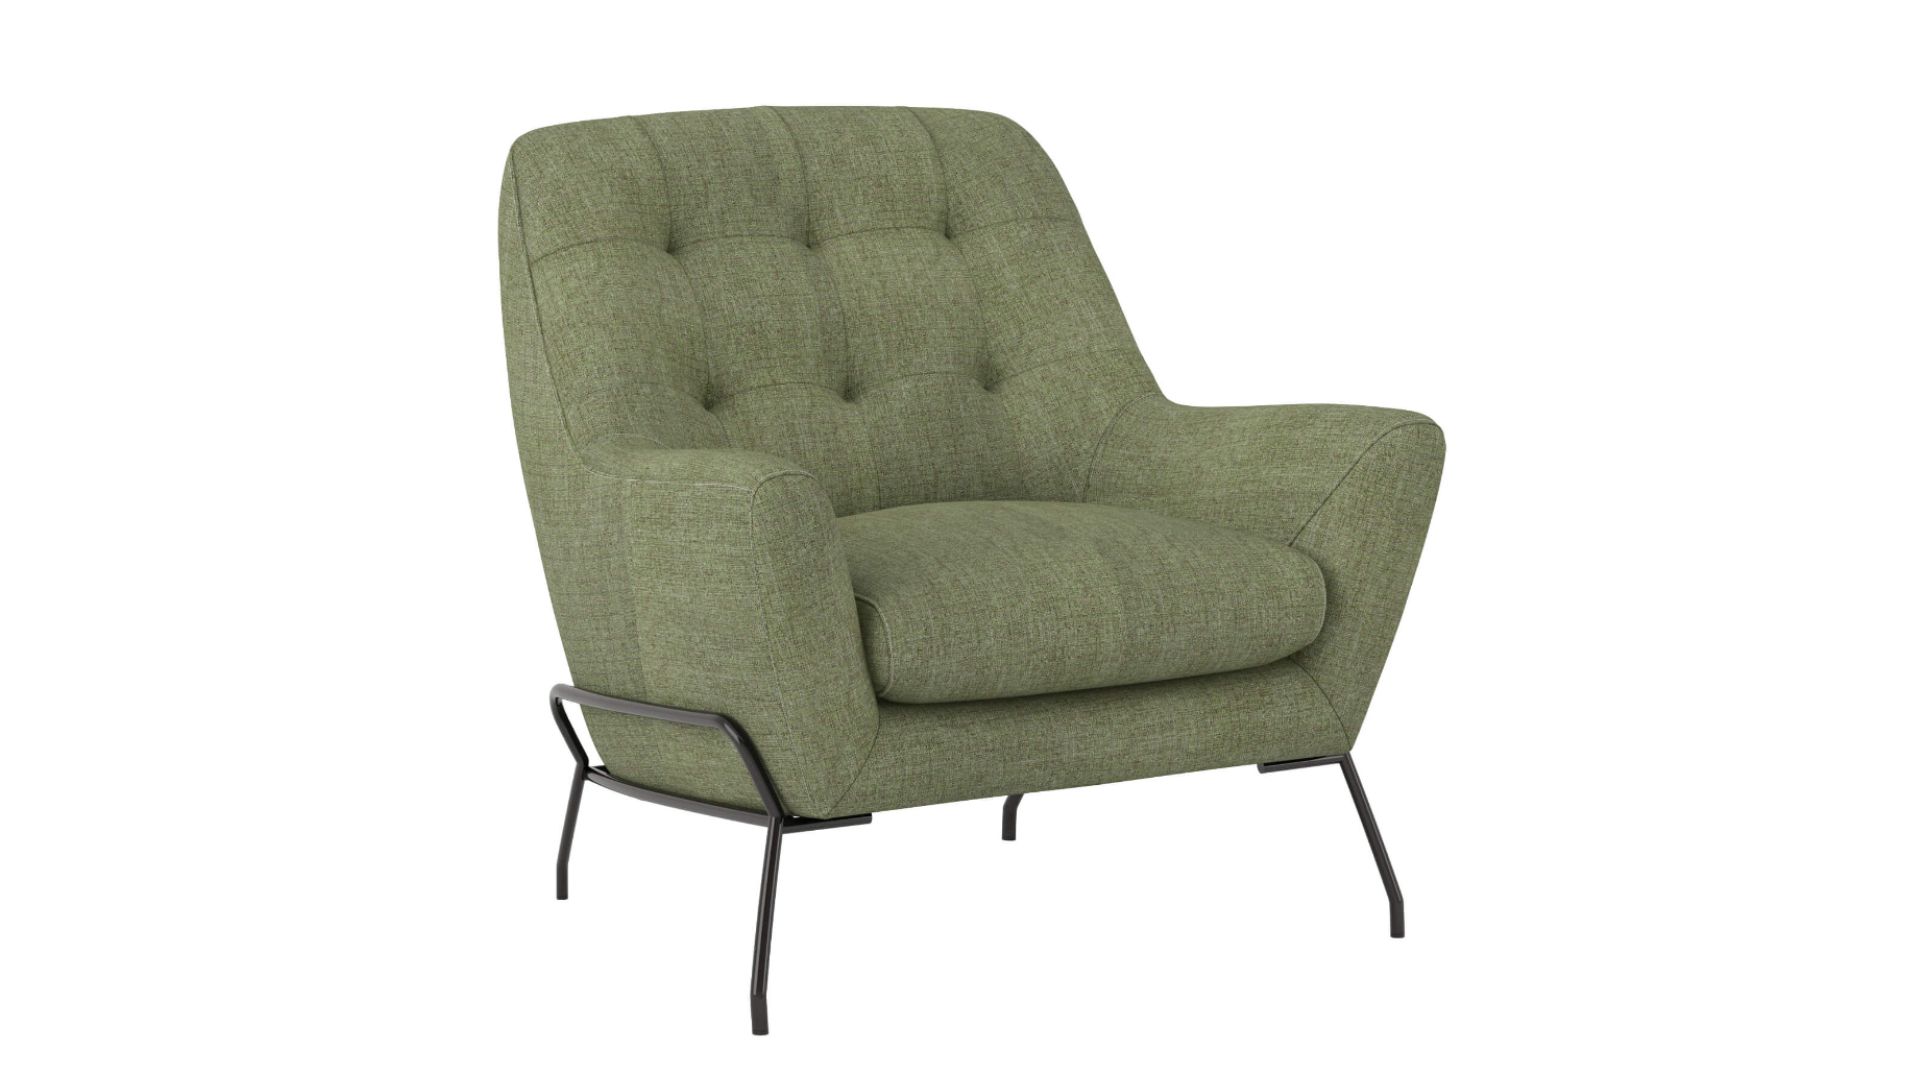 3D modeling for an armchair with a high back and armrests, upholstered in a textured green fabric